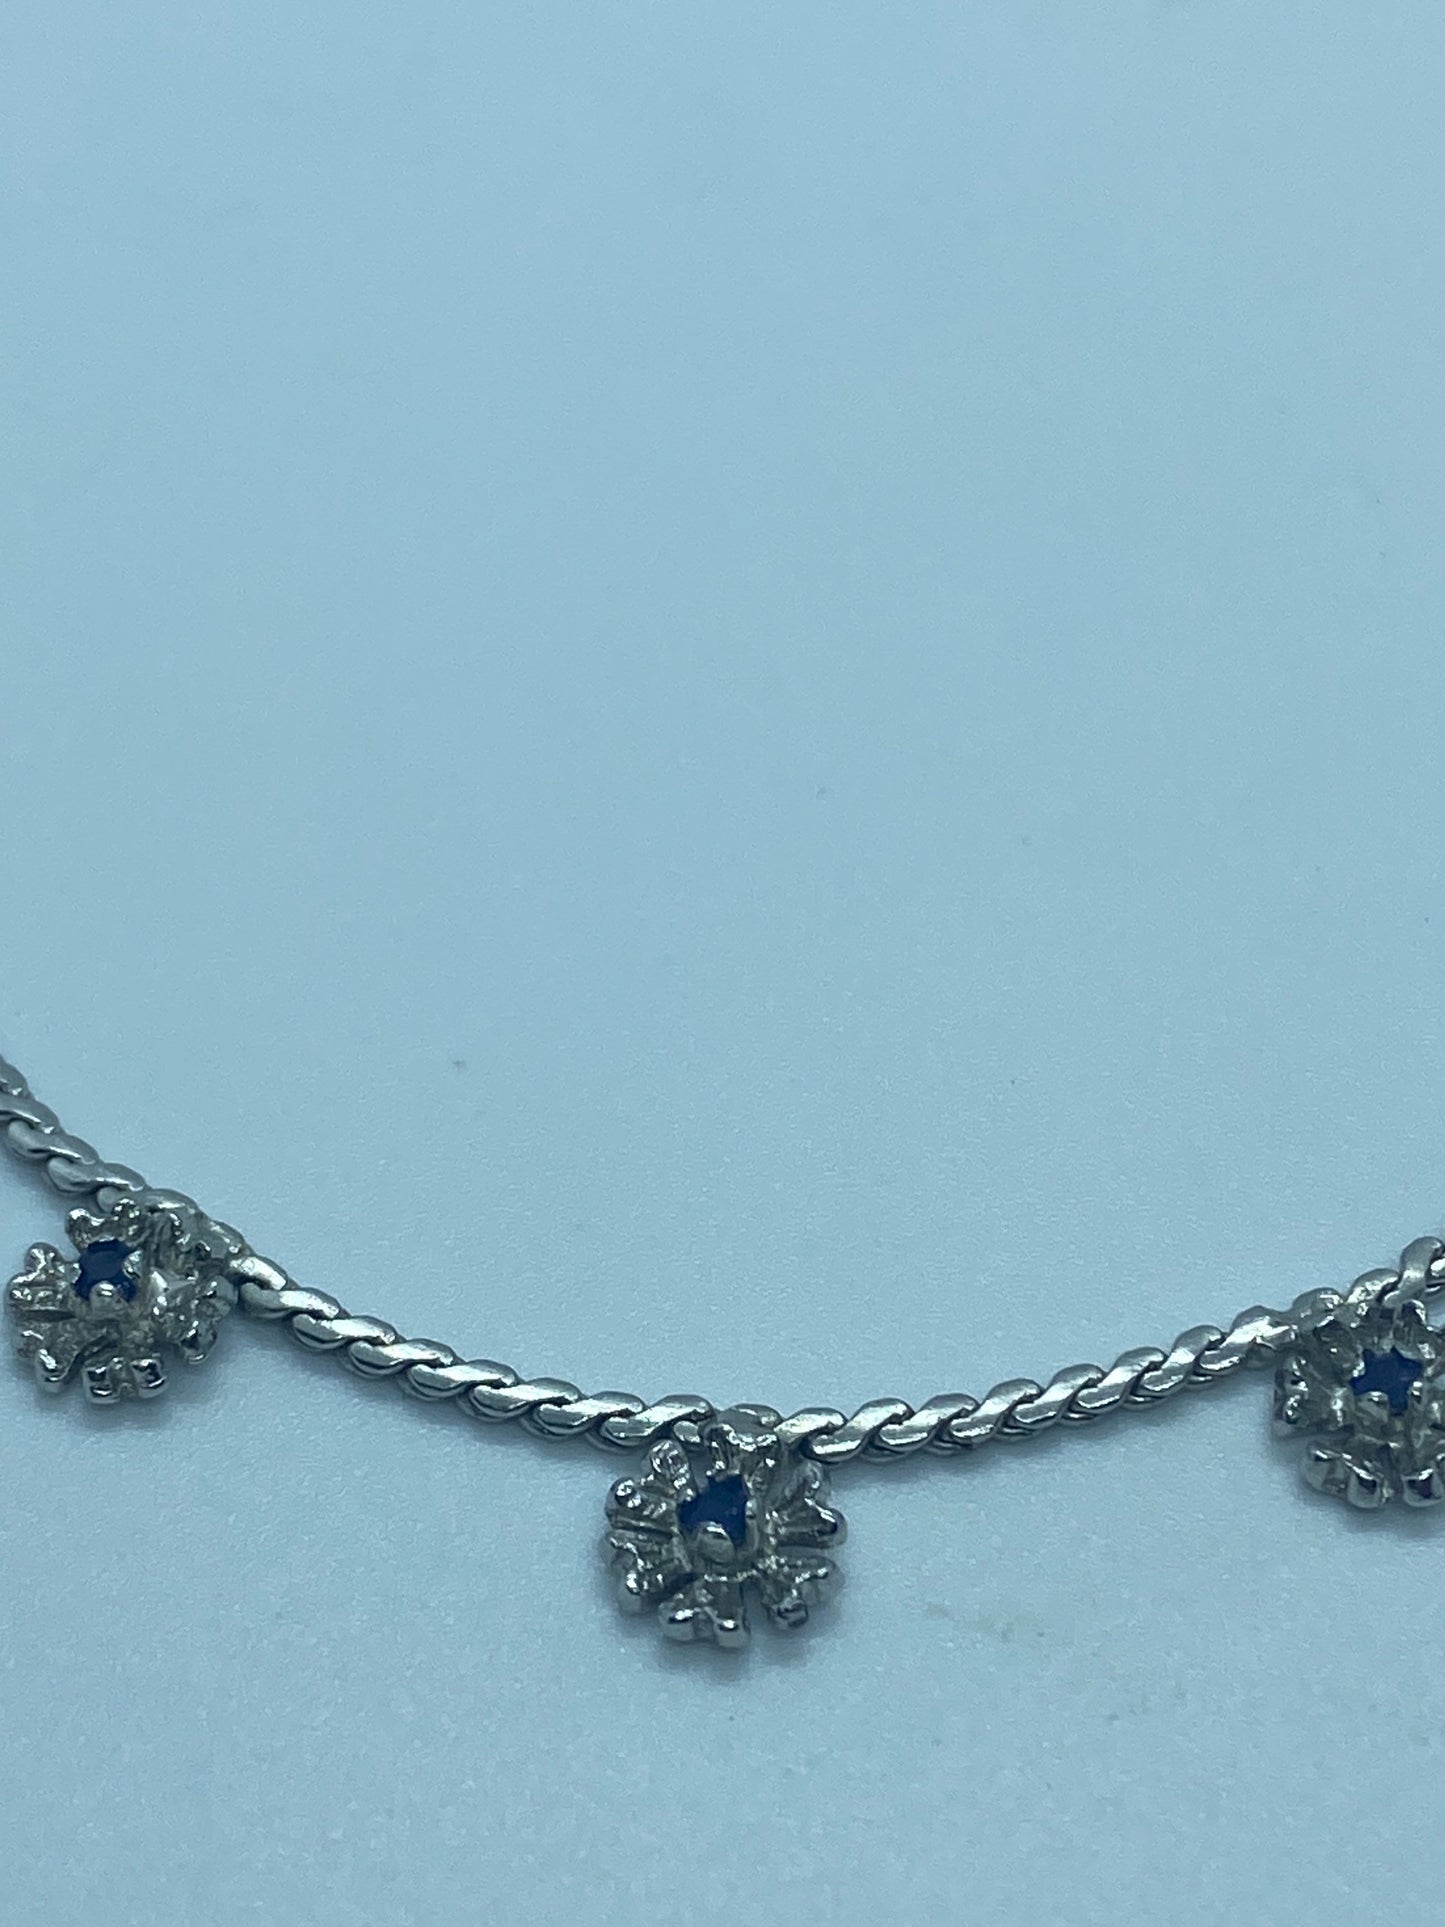 Vintage 925 Sterling Silver Blue Sapphire Flower 16 inch necklace